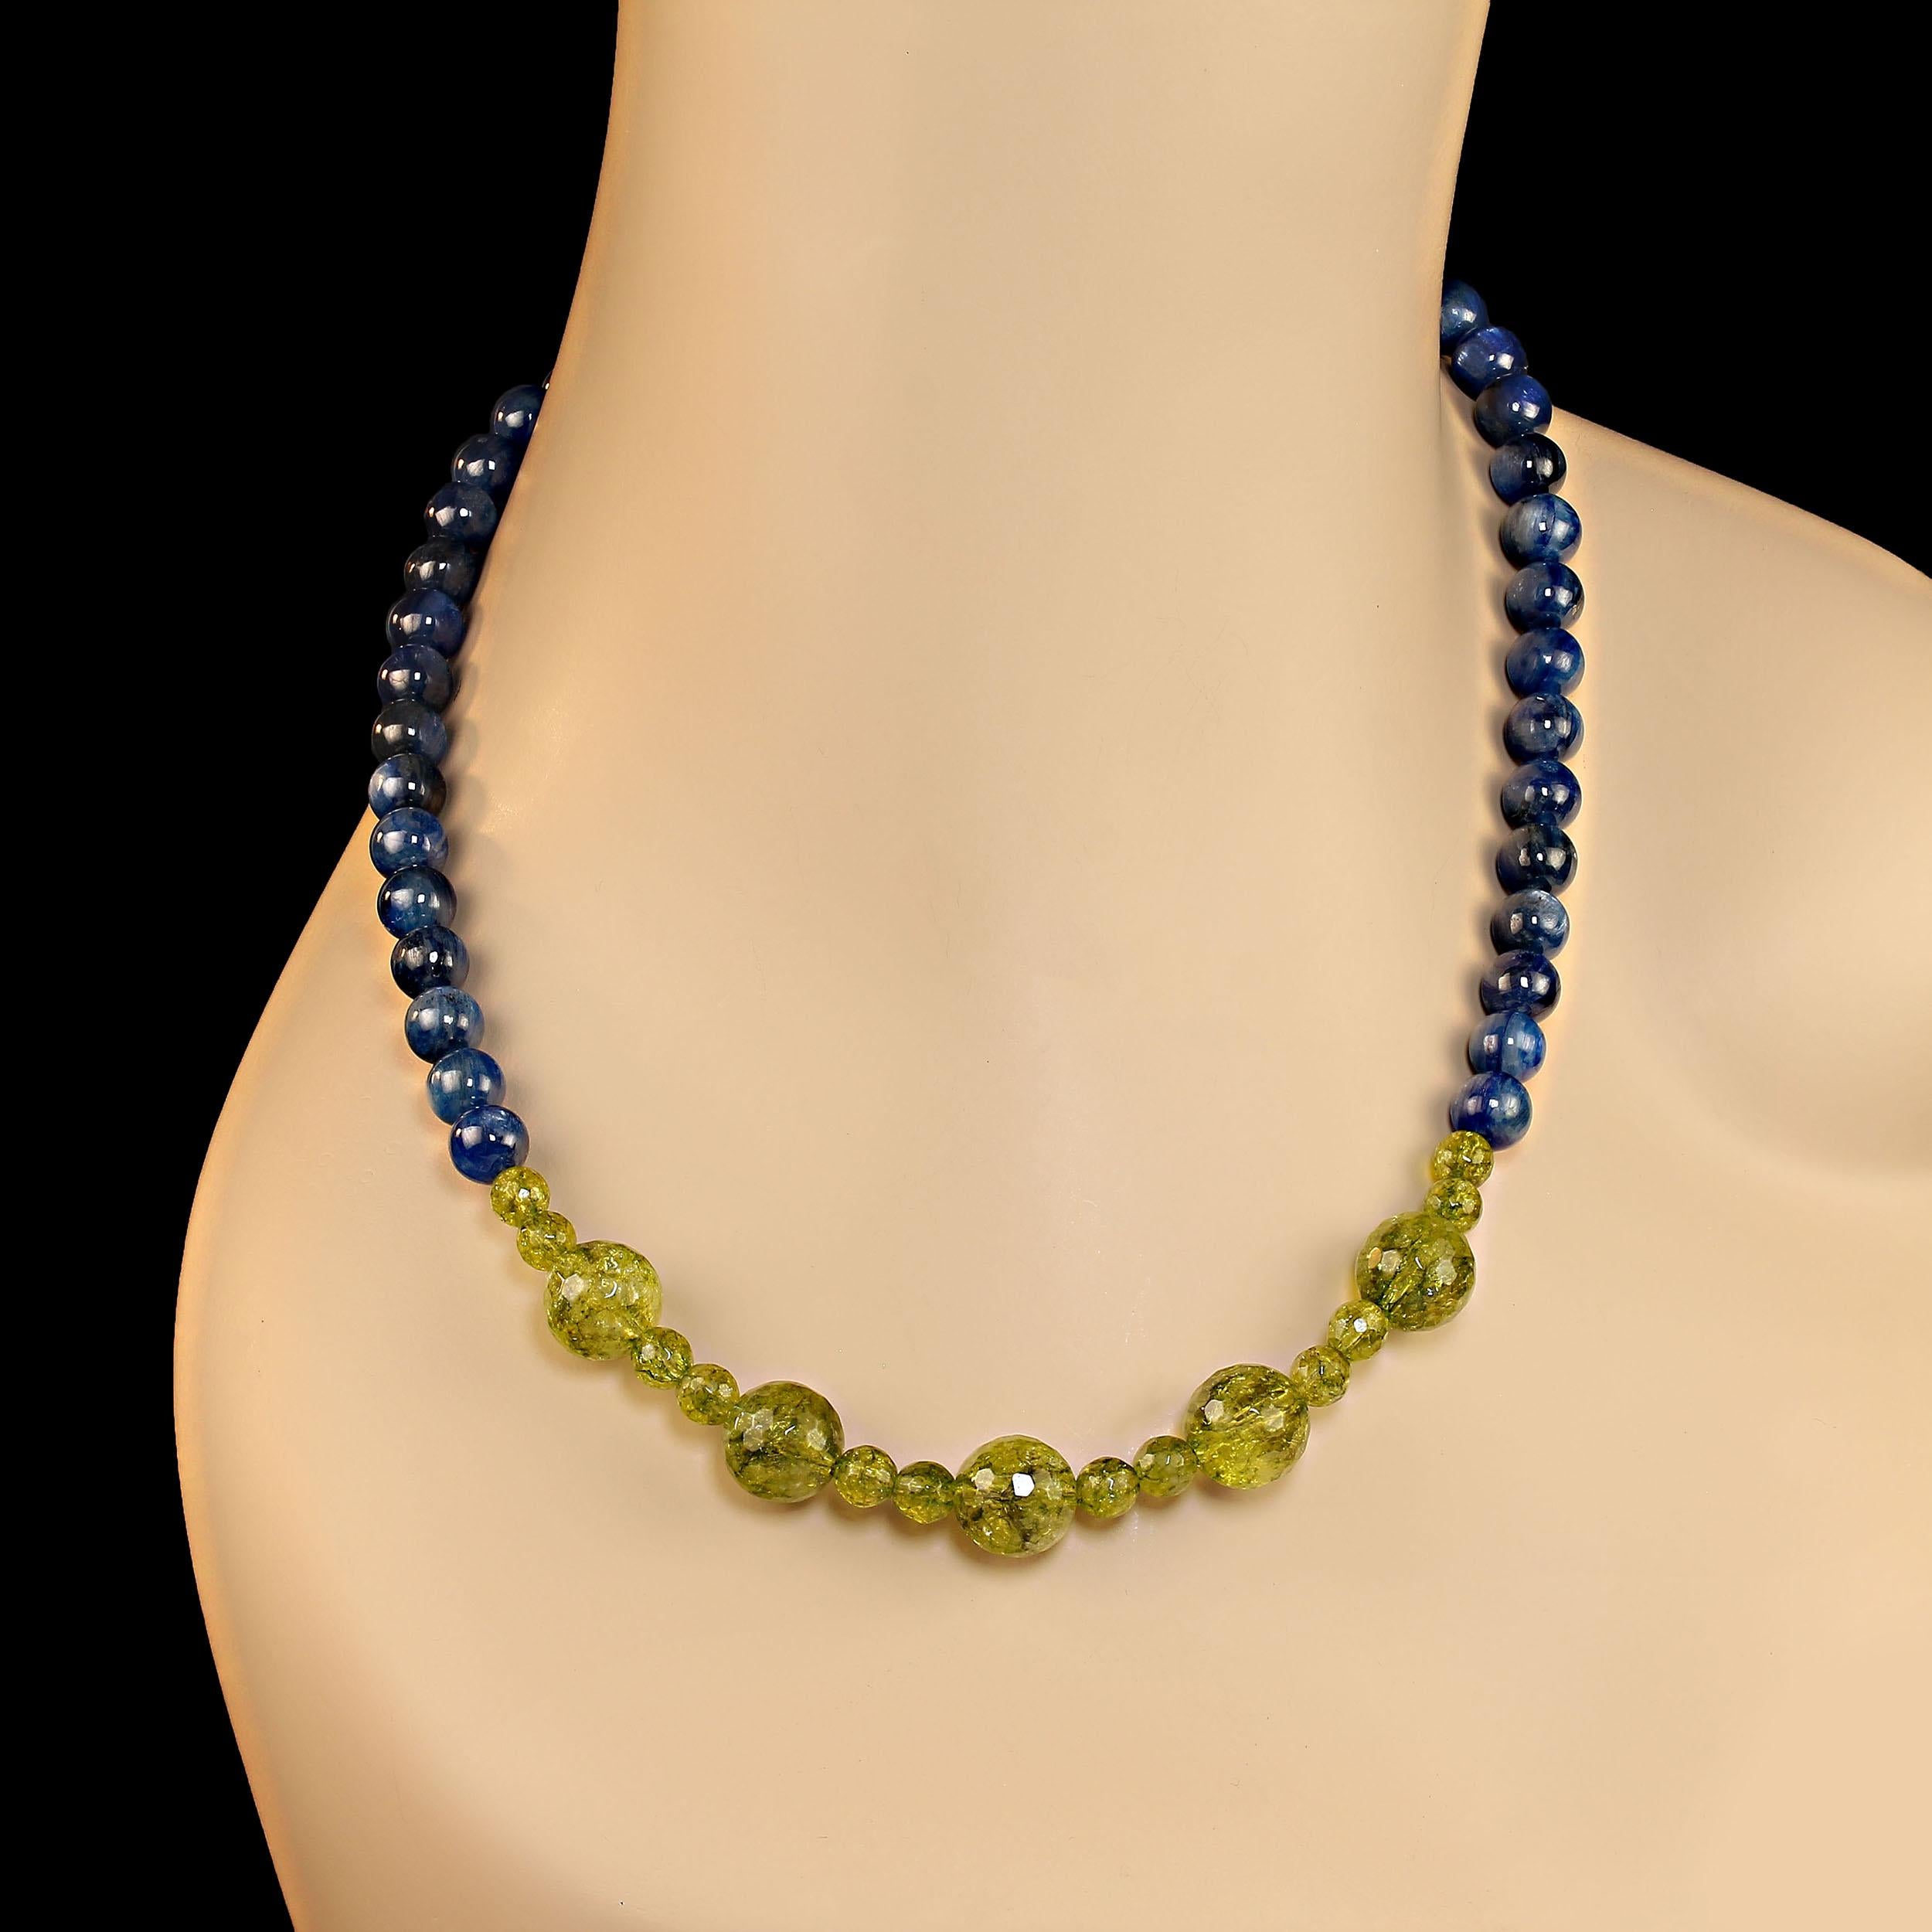 Bead AJD 19 Inch Unique Peridot and Kyanite Necklace Perfect for Winter  Great Gift! For Sale